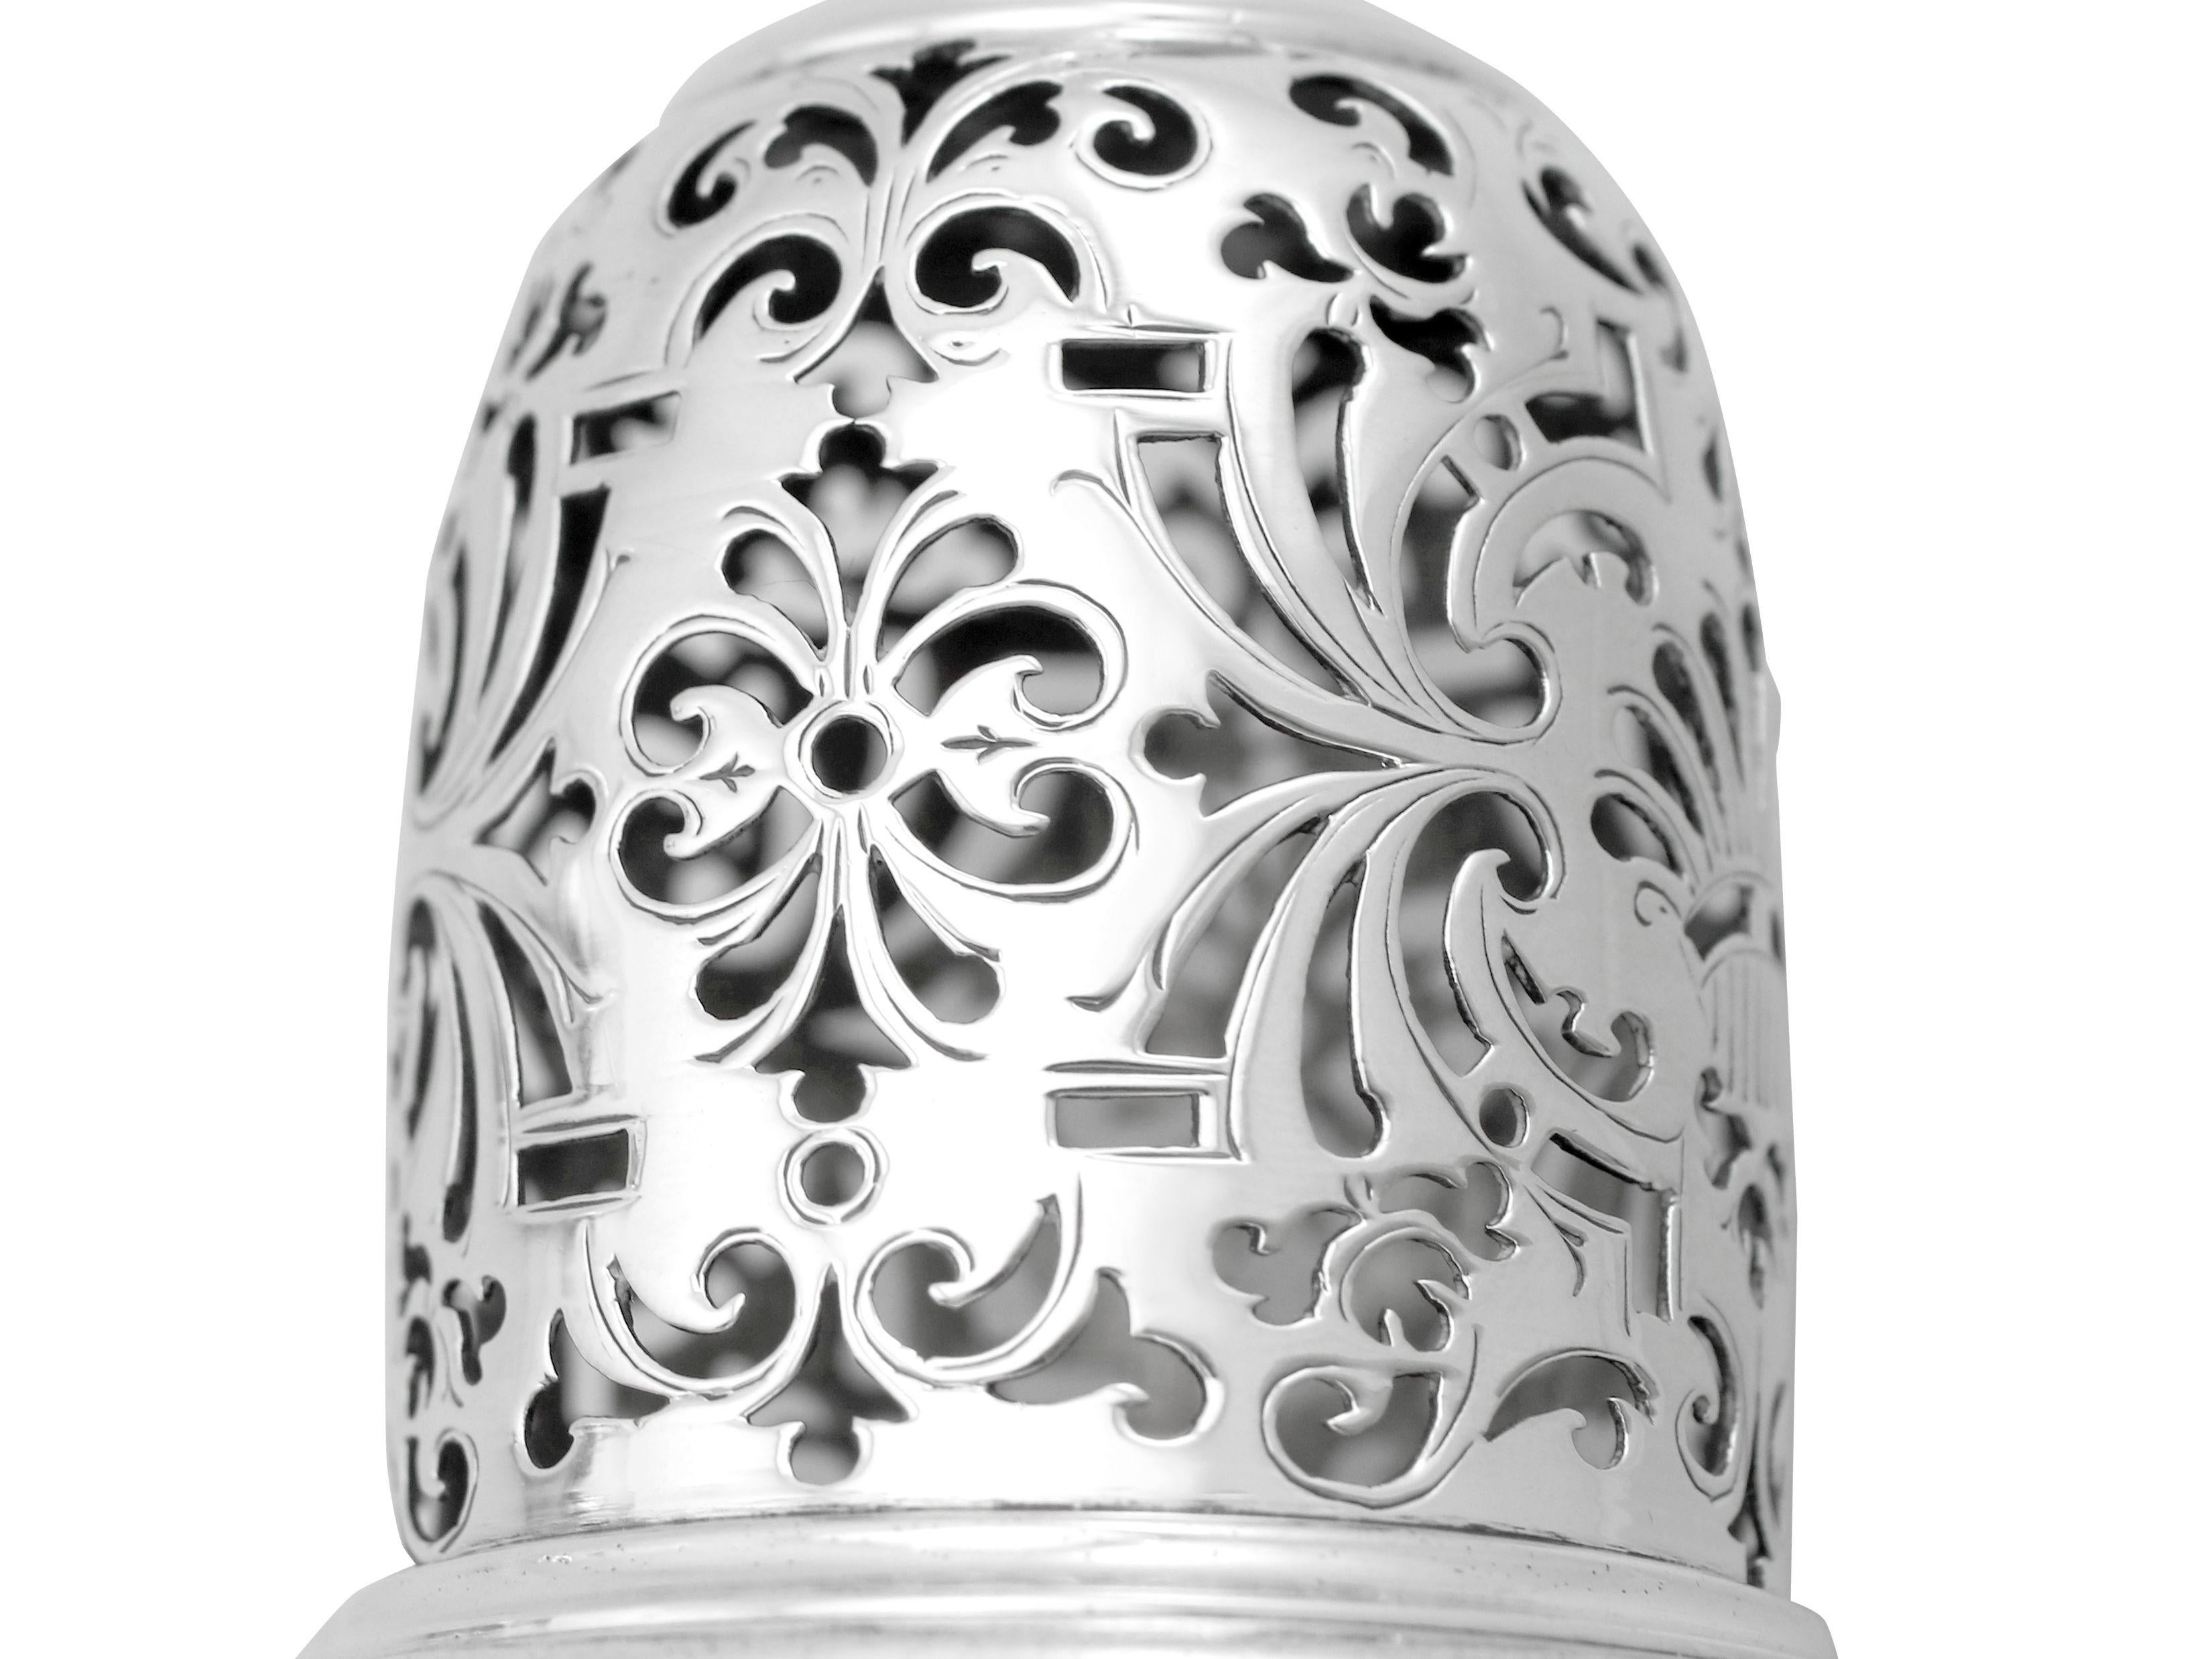 Samuel Wood Antique Sterling Silver Sugar Caster In Excellent Condition For Sale In Jesmond, Newcastle Upon Tyne